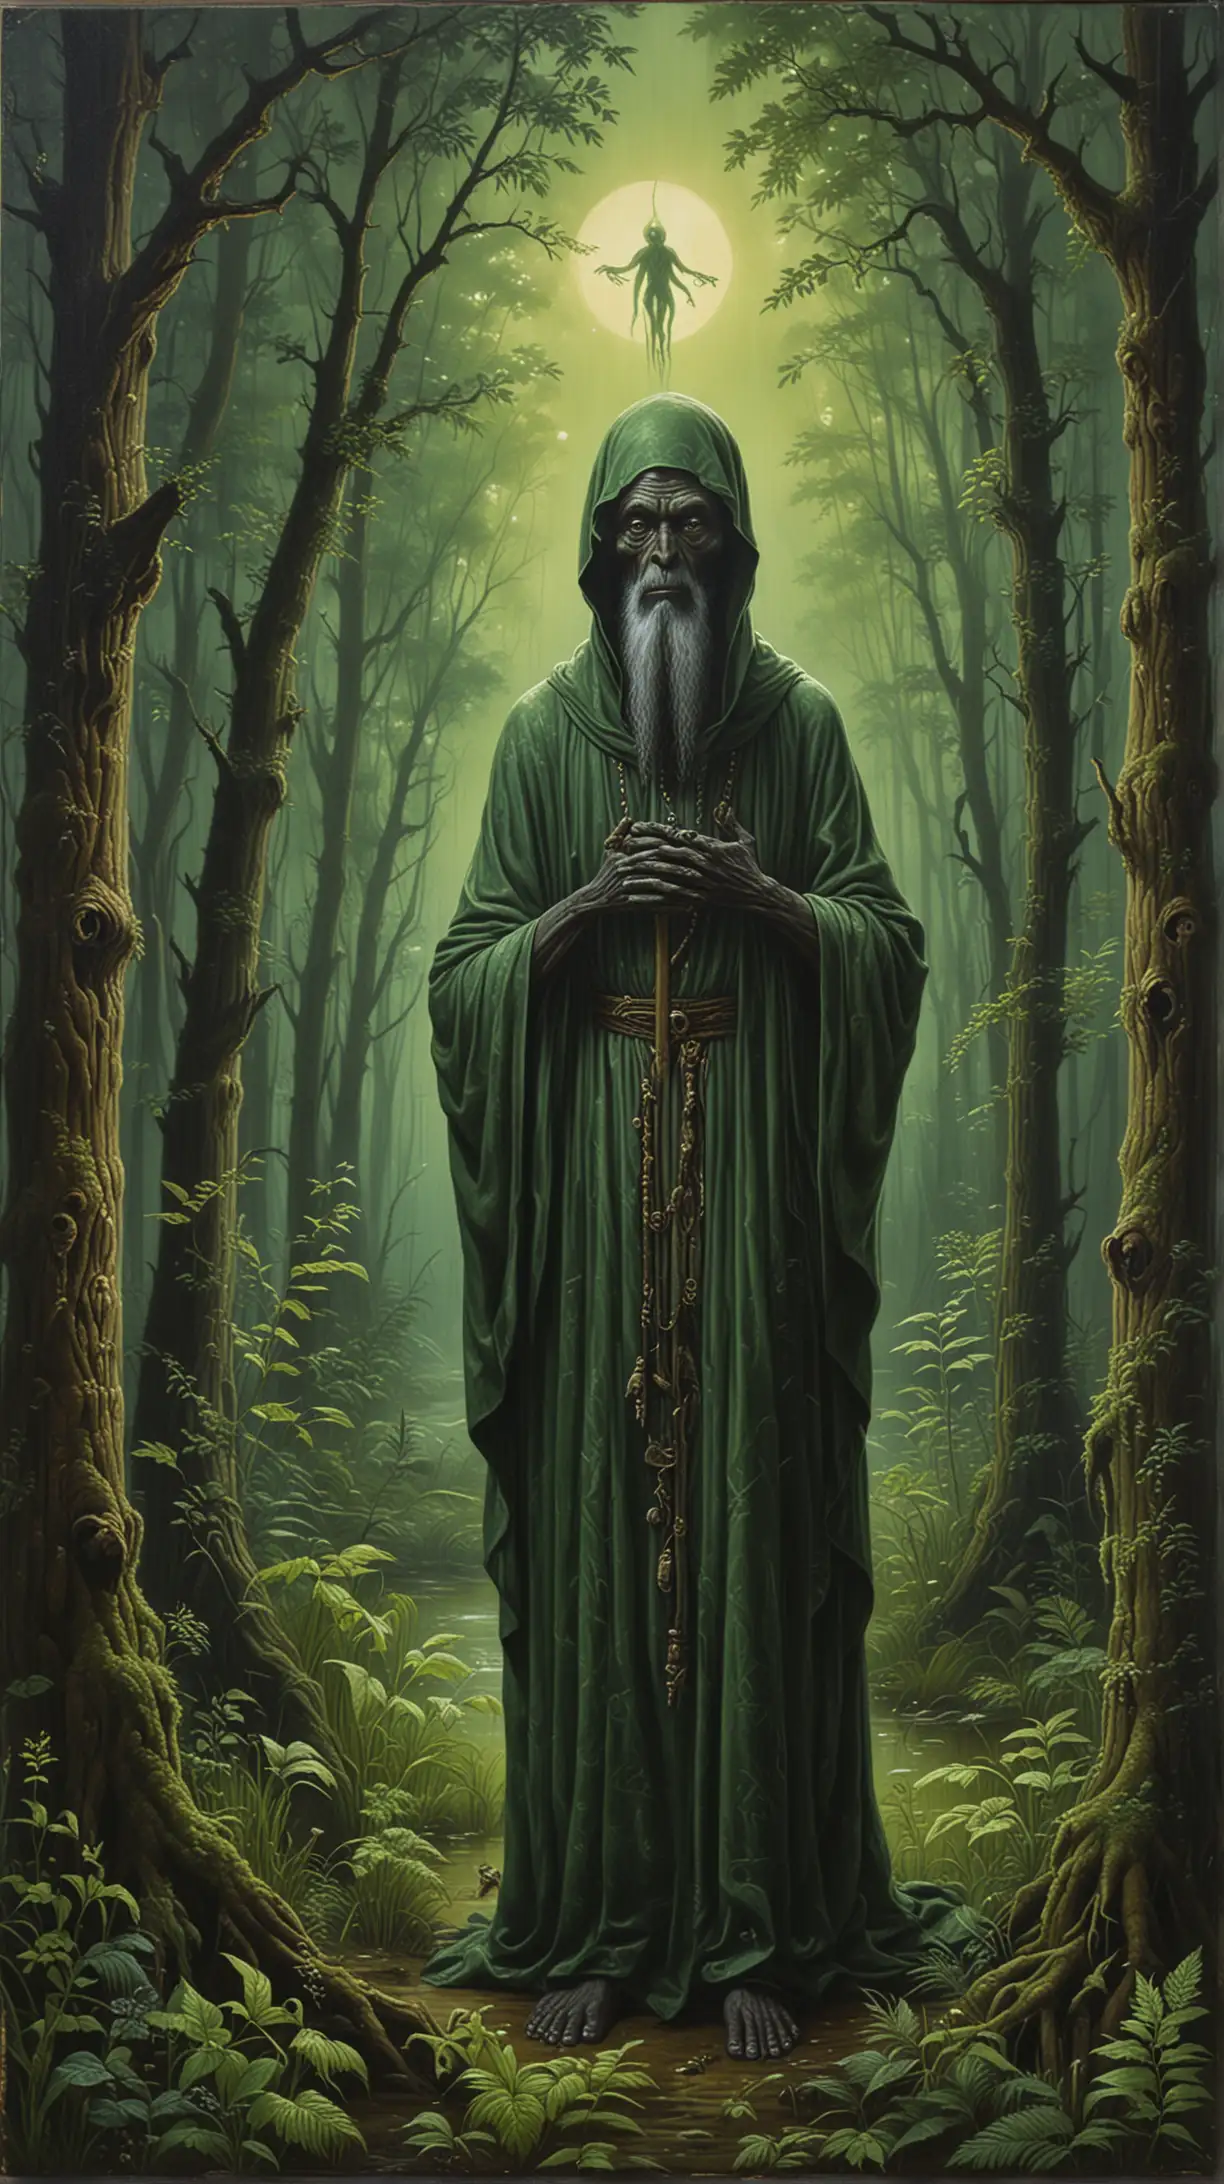 Slavonic Style Forest Mysticism Iconic Portrayal of a BlackSkinned Alien Holy Hermit